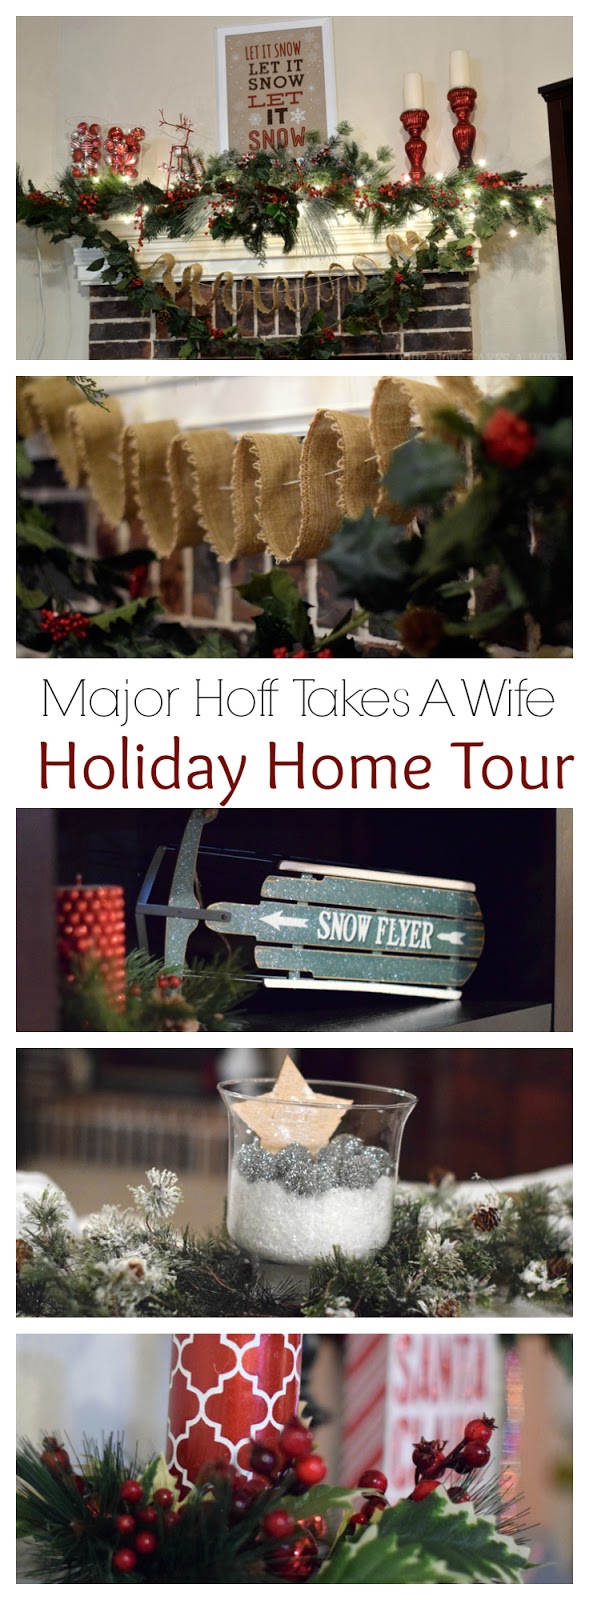 Major Hoff Takes A Wife Holiday Home Tour